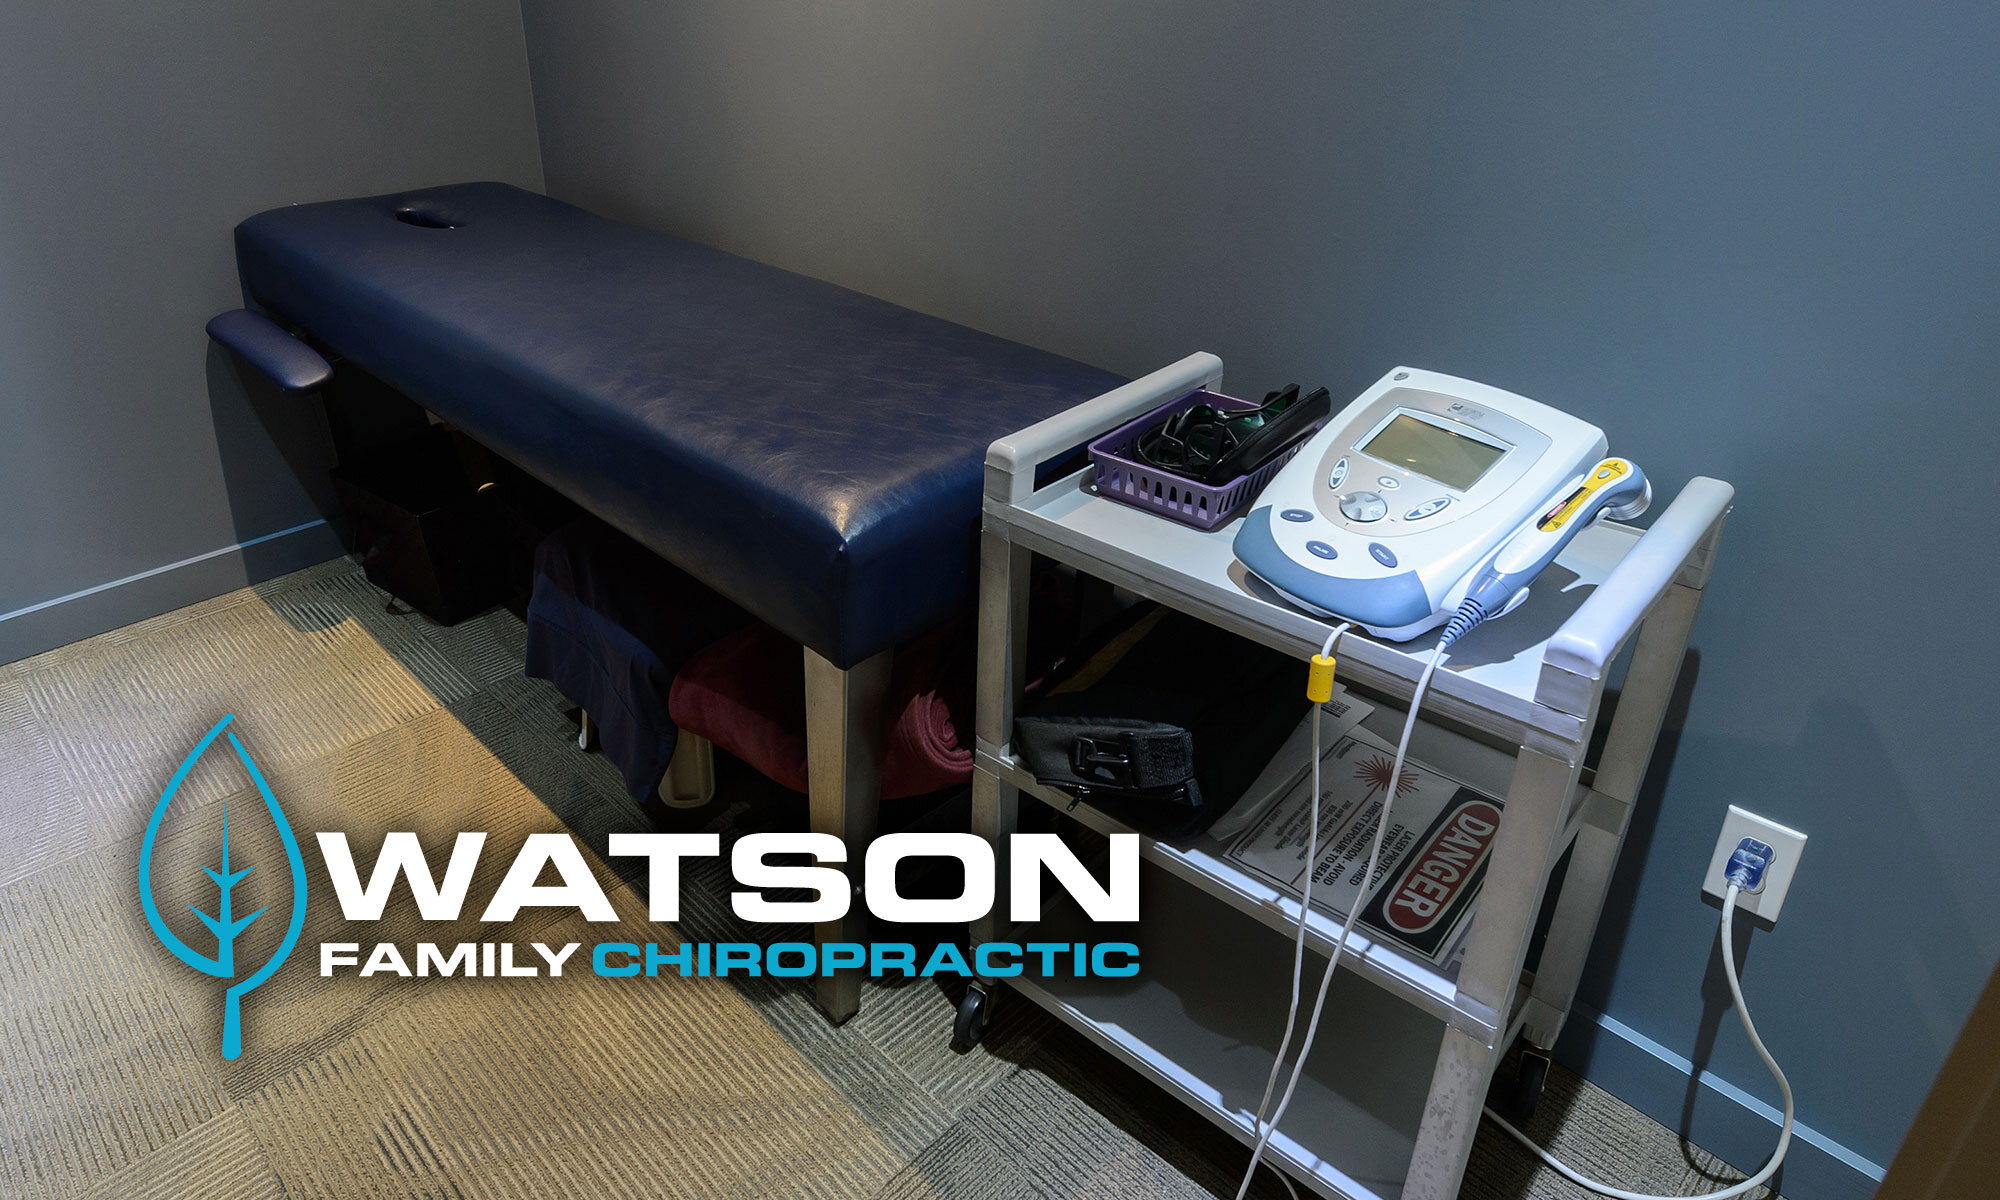  Treatment room and equipment cart at Watson Family Chiropratic 